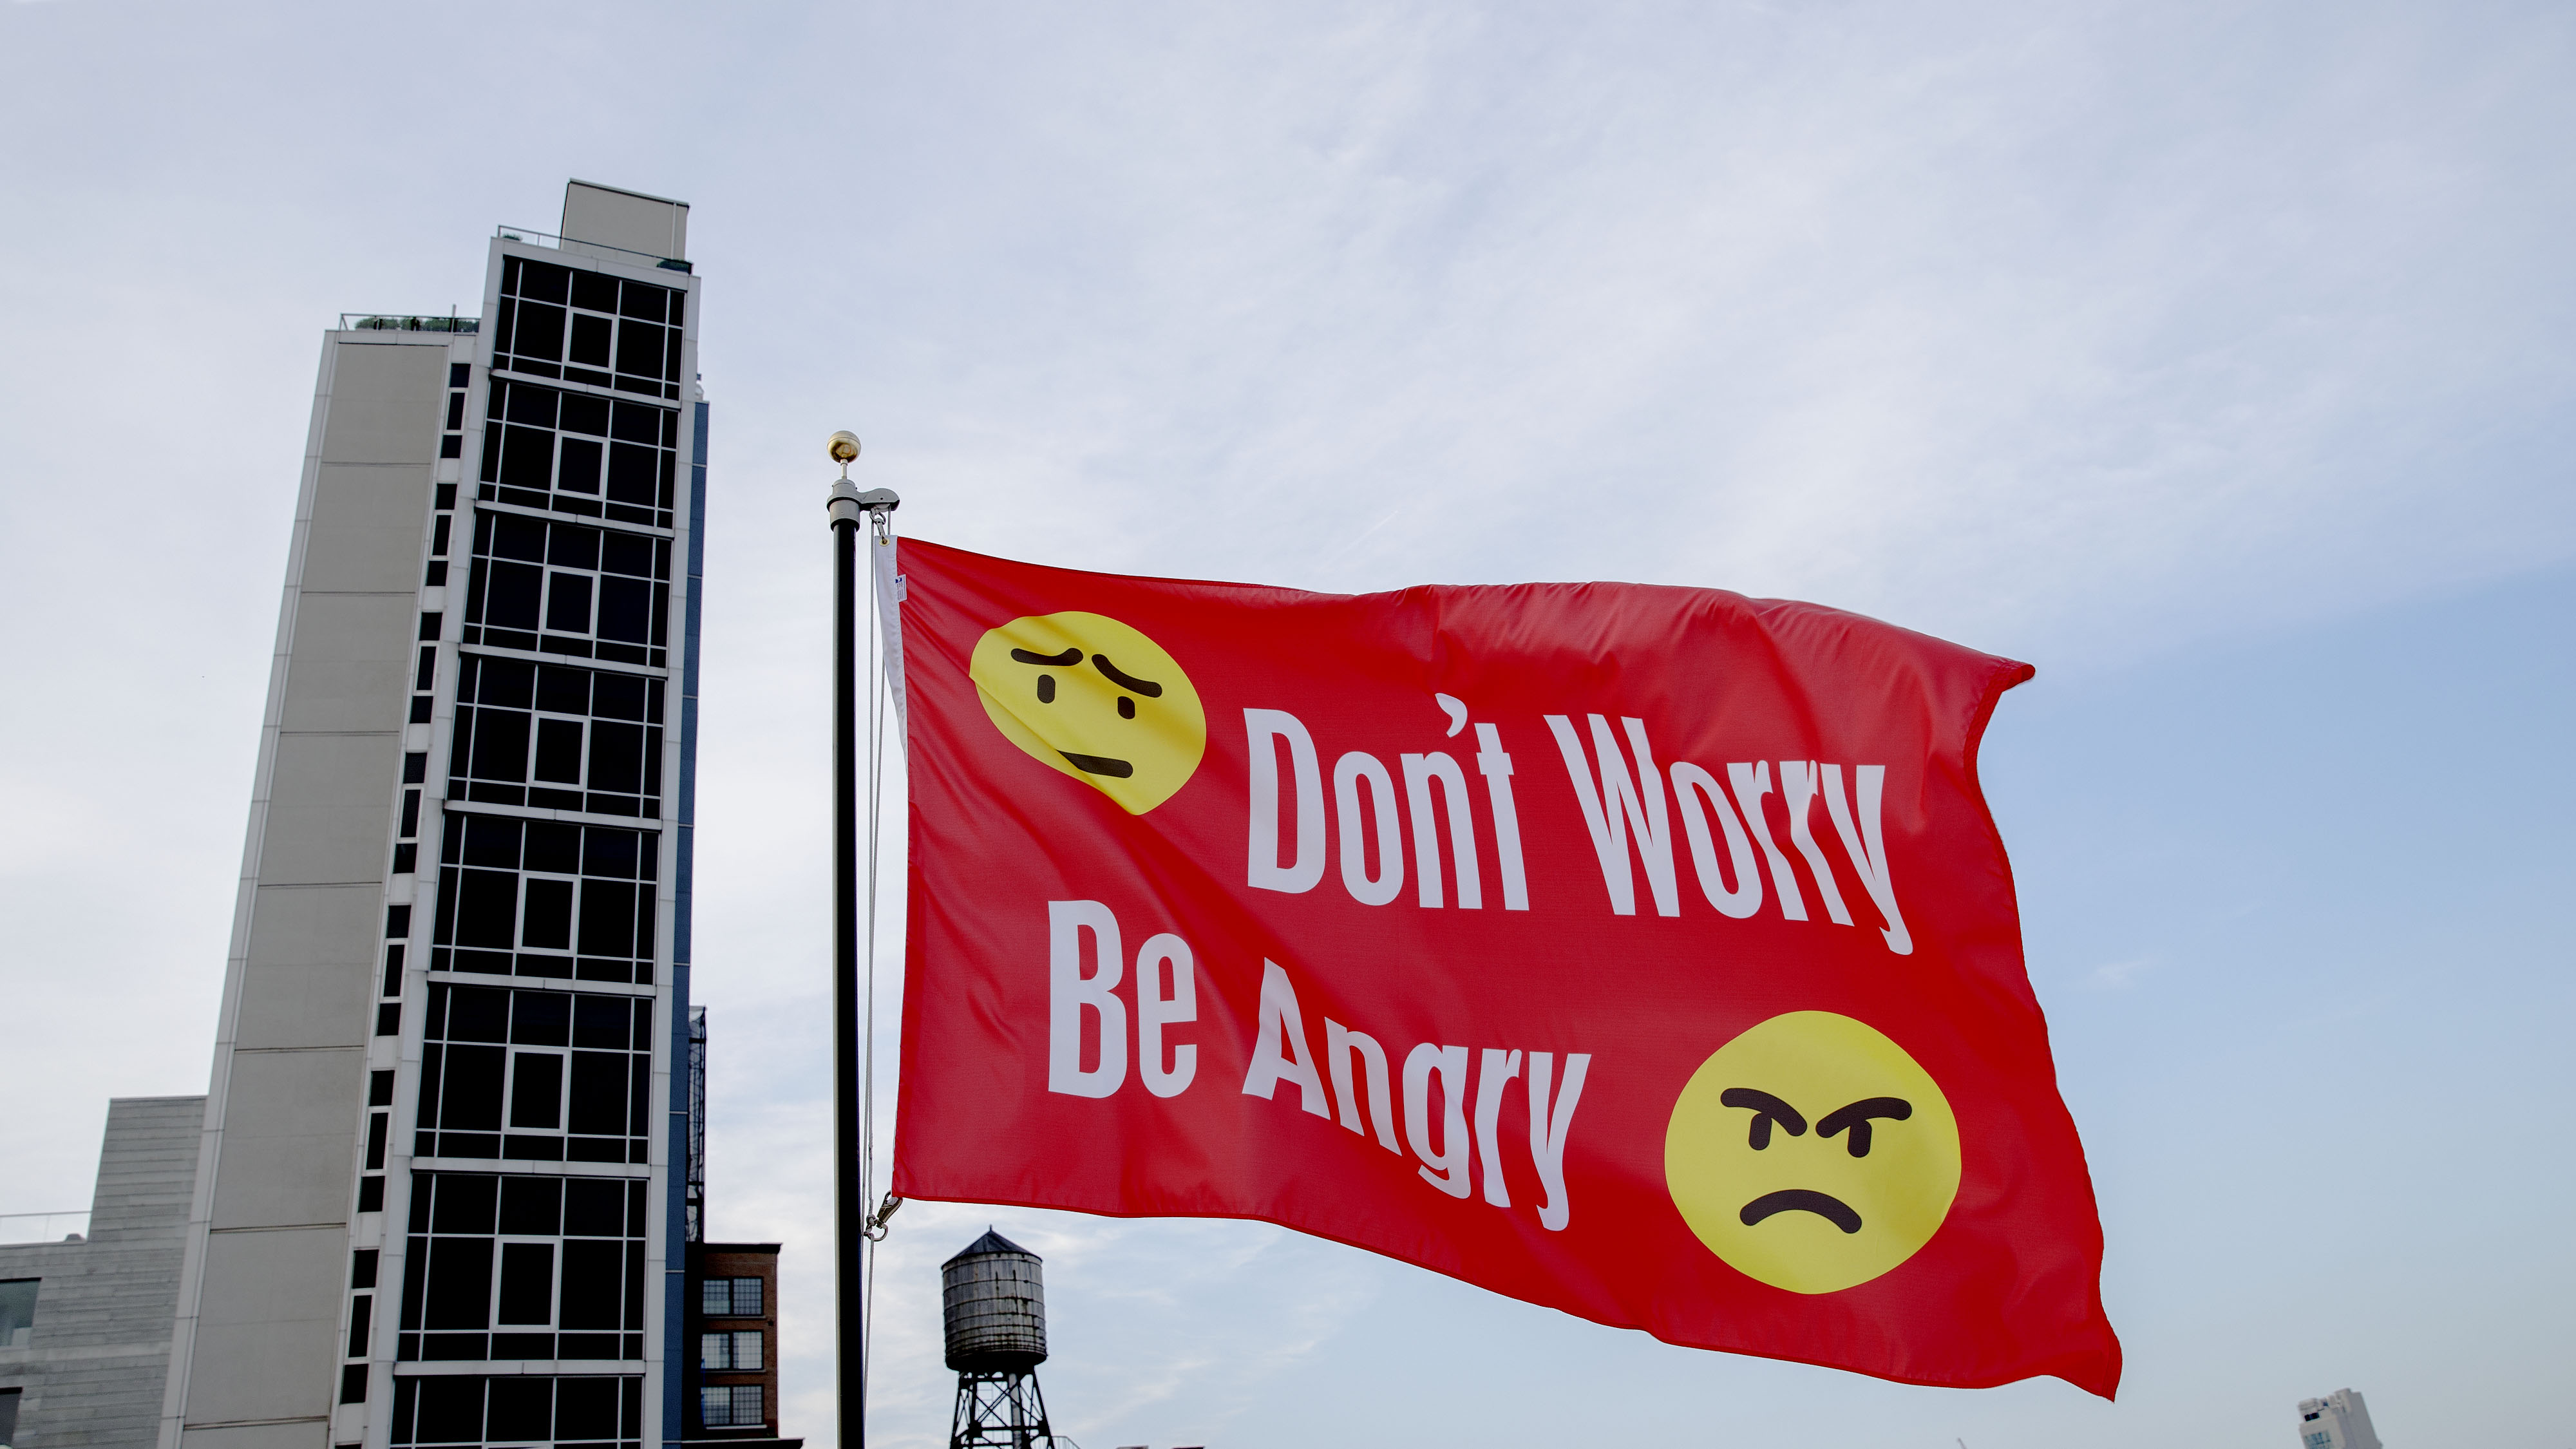 Jeremy Deller, Don’t Worry Be Angry, 2017. Red nylon flag reading "Don't Worry Be Angry" in white text. There are two yellow emoji faces; one is worried and the other is visibly angry. 